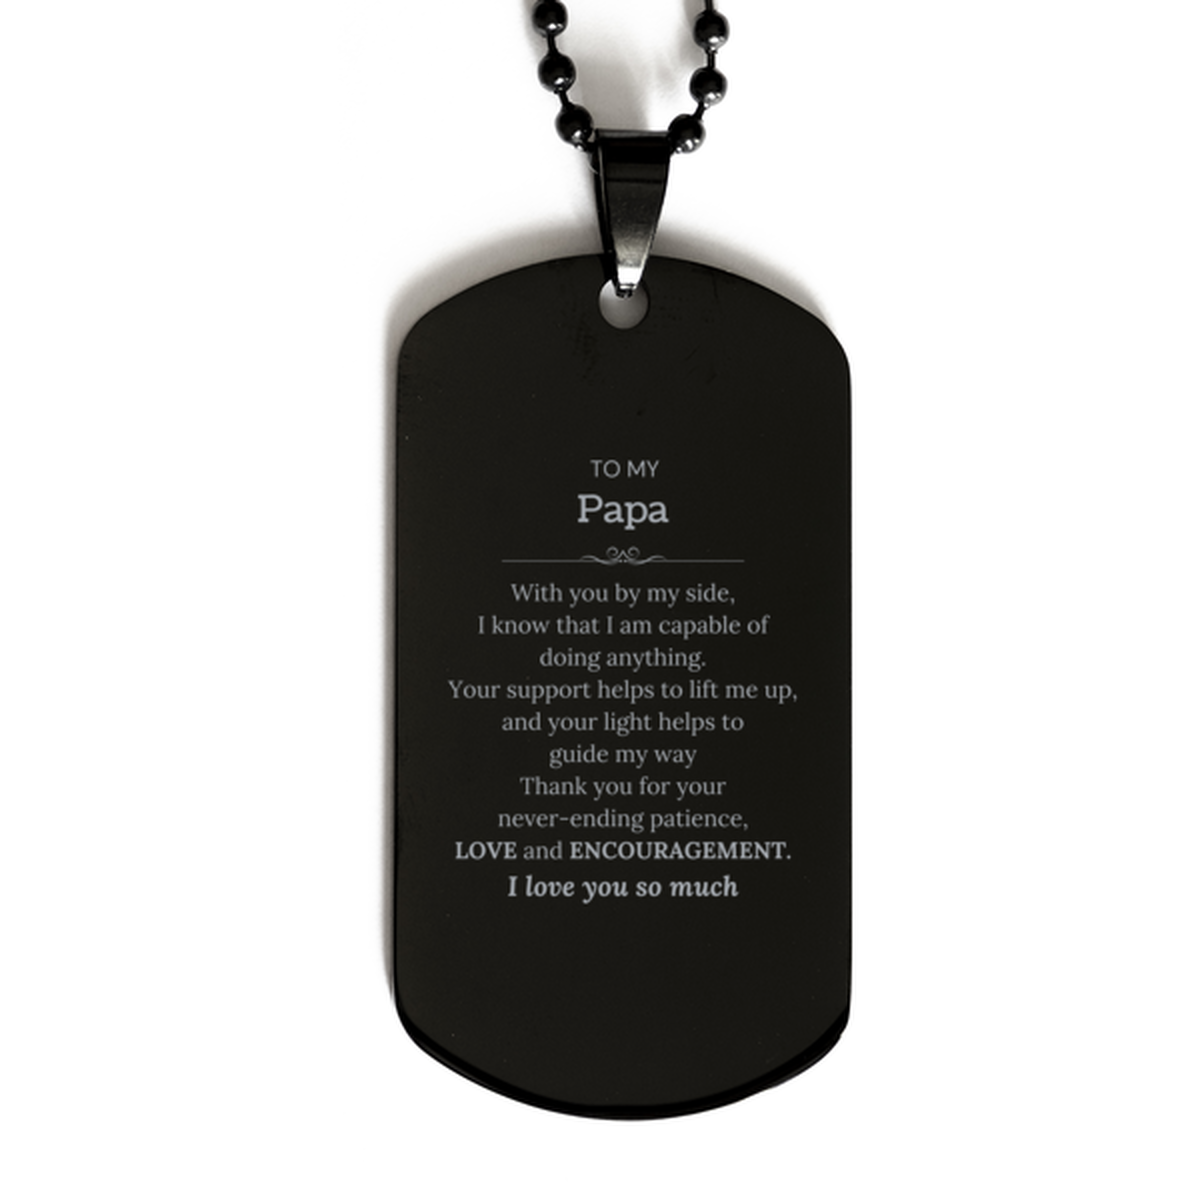 Appreciation Papa Black Dog Tag Gifts, To My Papa Birthday Christmas Wedding Keepsake Gifts for Papa With you by my side, I know that I am capable of doing anything. I love you so much